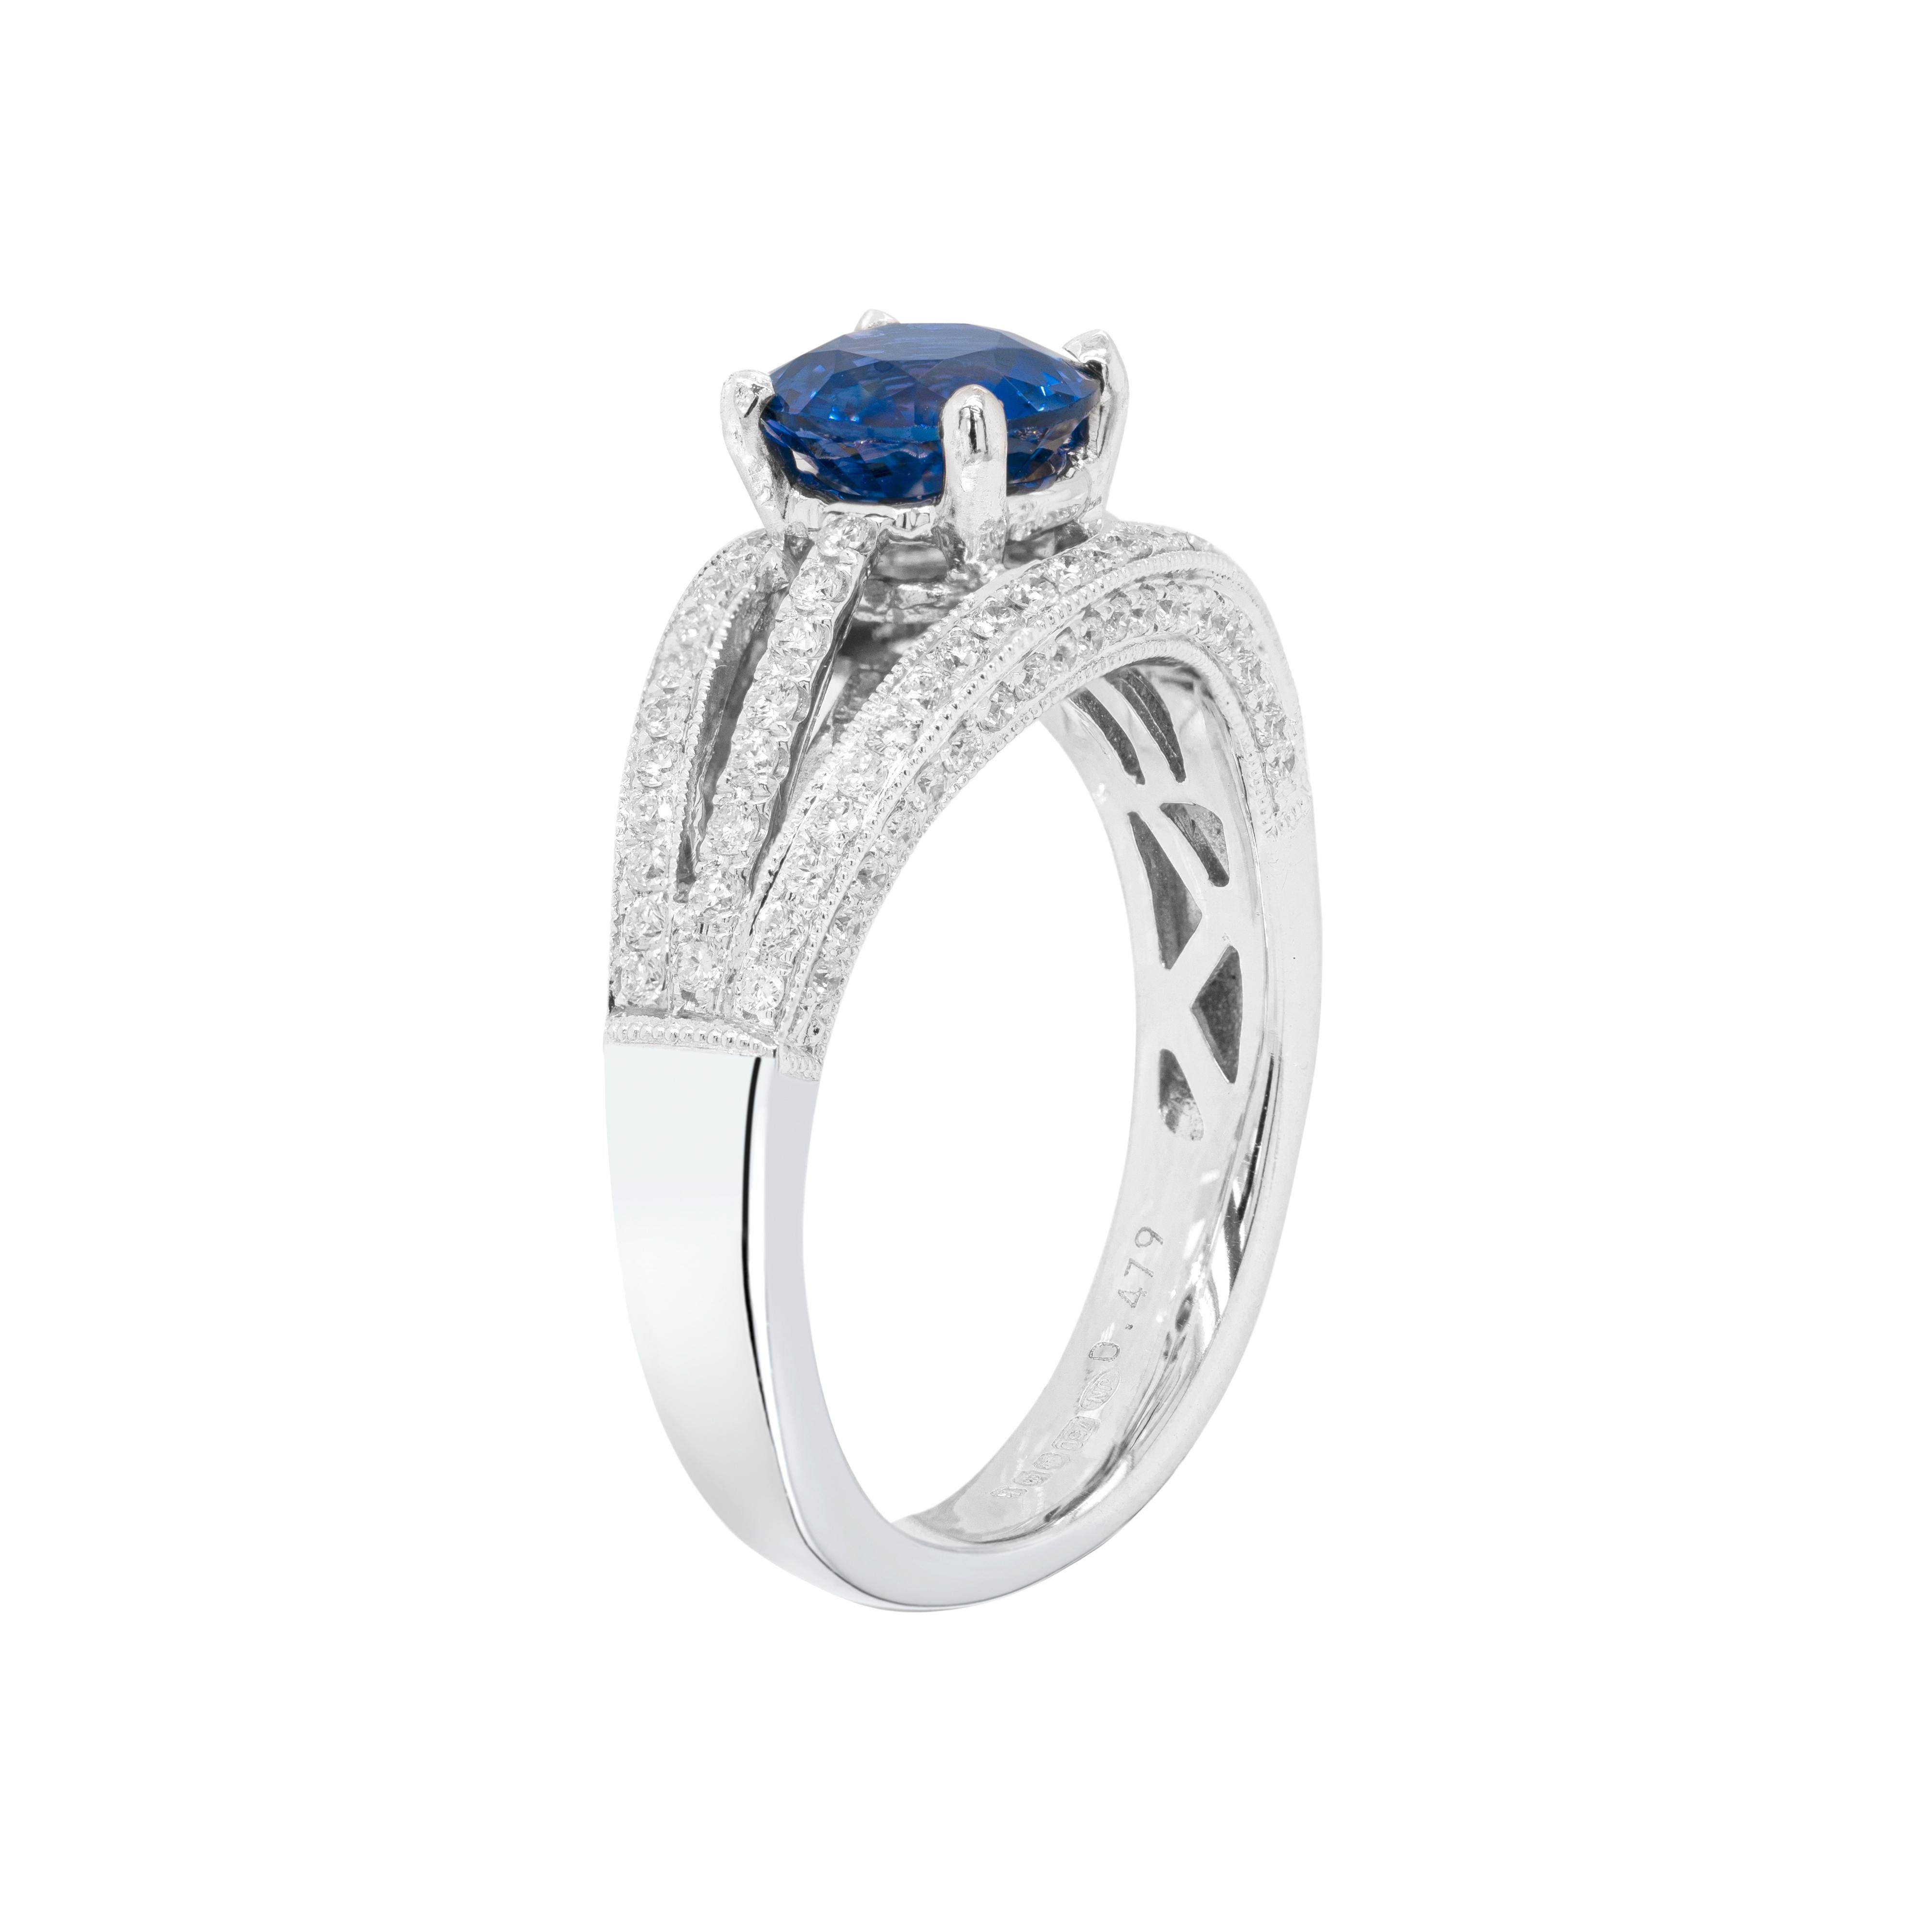 This stunning engagement ring features a vibrant round royal blue sapphire in the centre weighing 1.42ct mounted in a four claw, open back setting. The gorgeous stone is set within a three row diamond set 18 carat white gold mount tapering to a fine